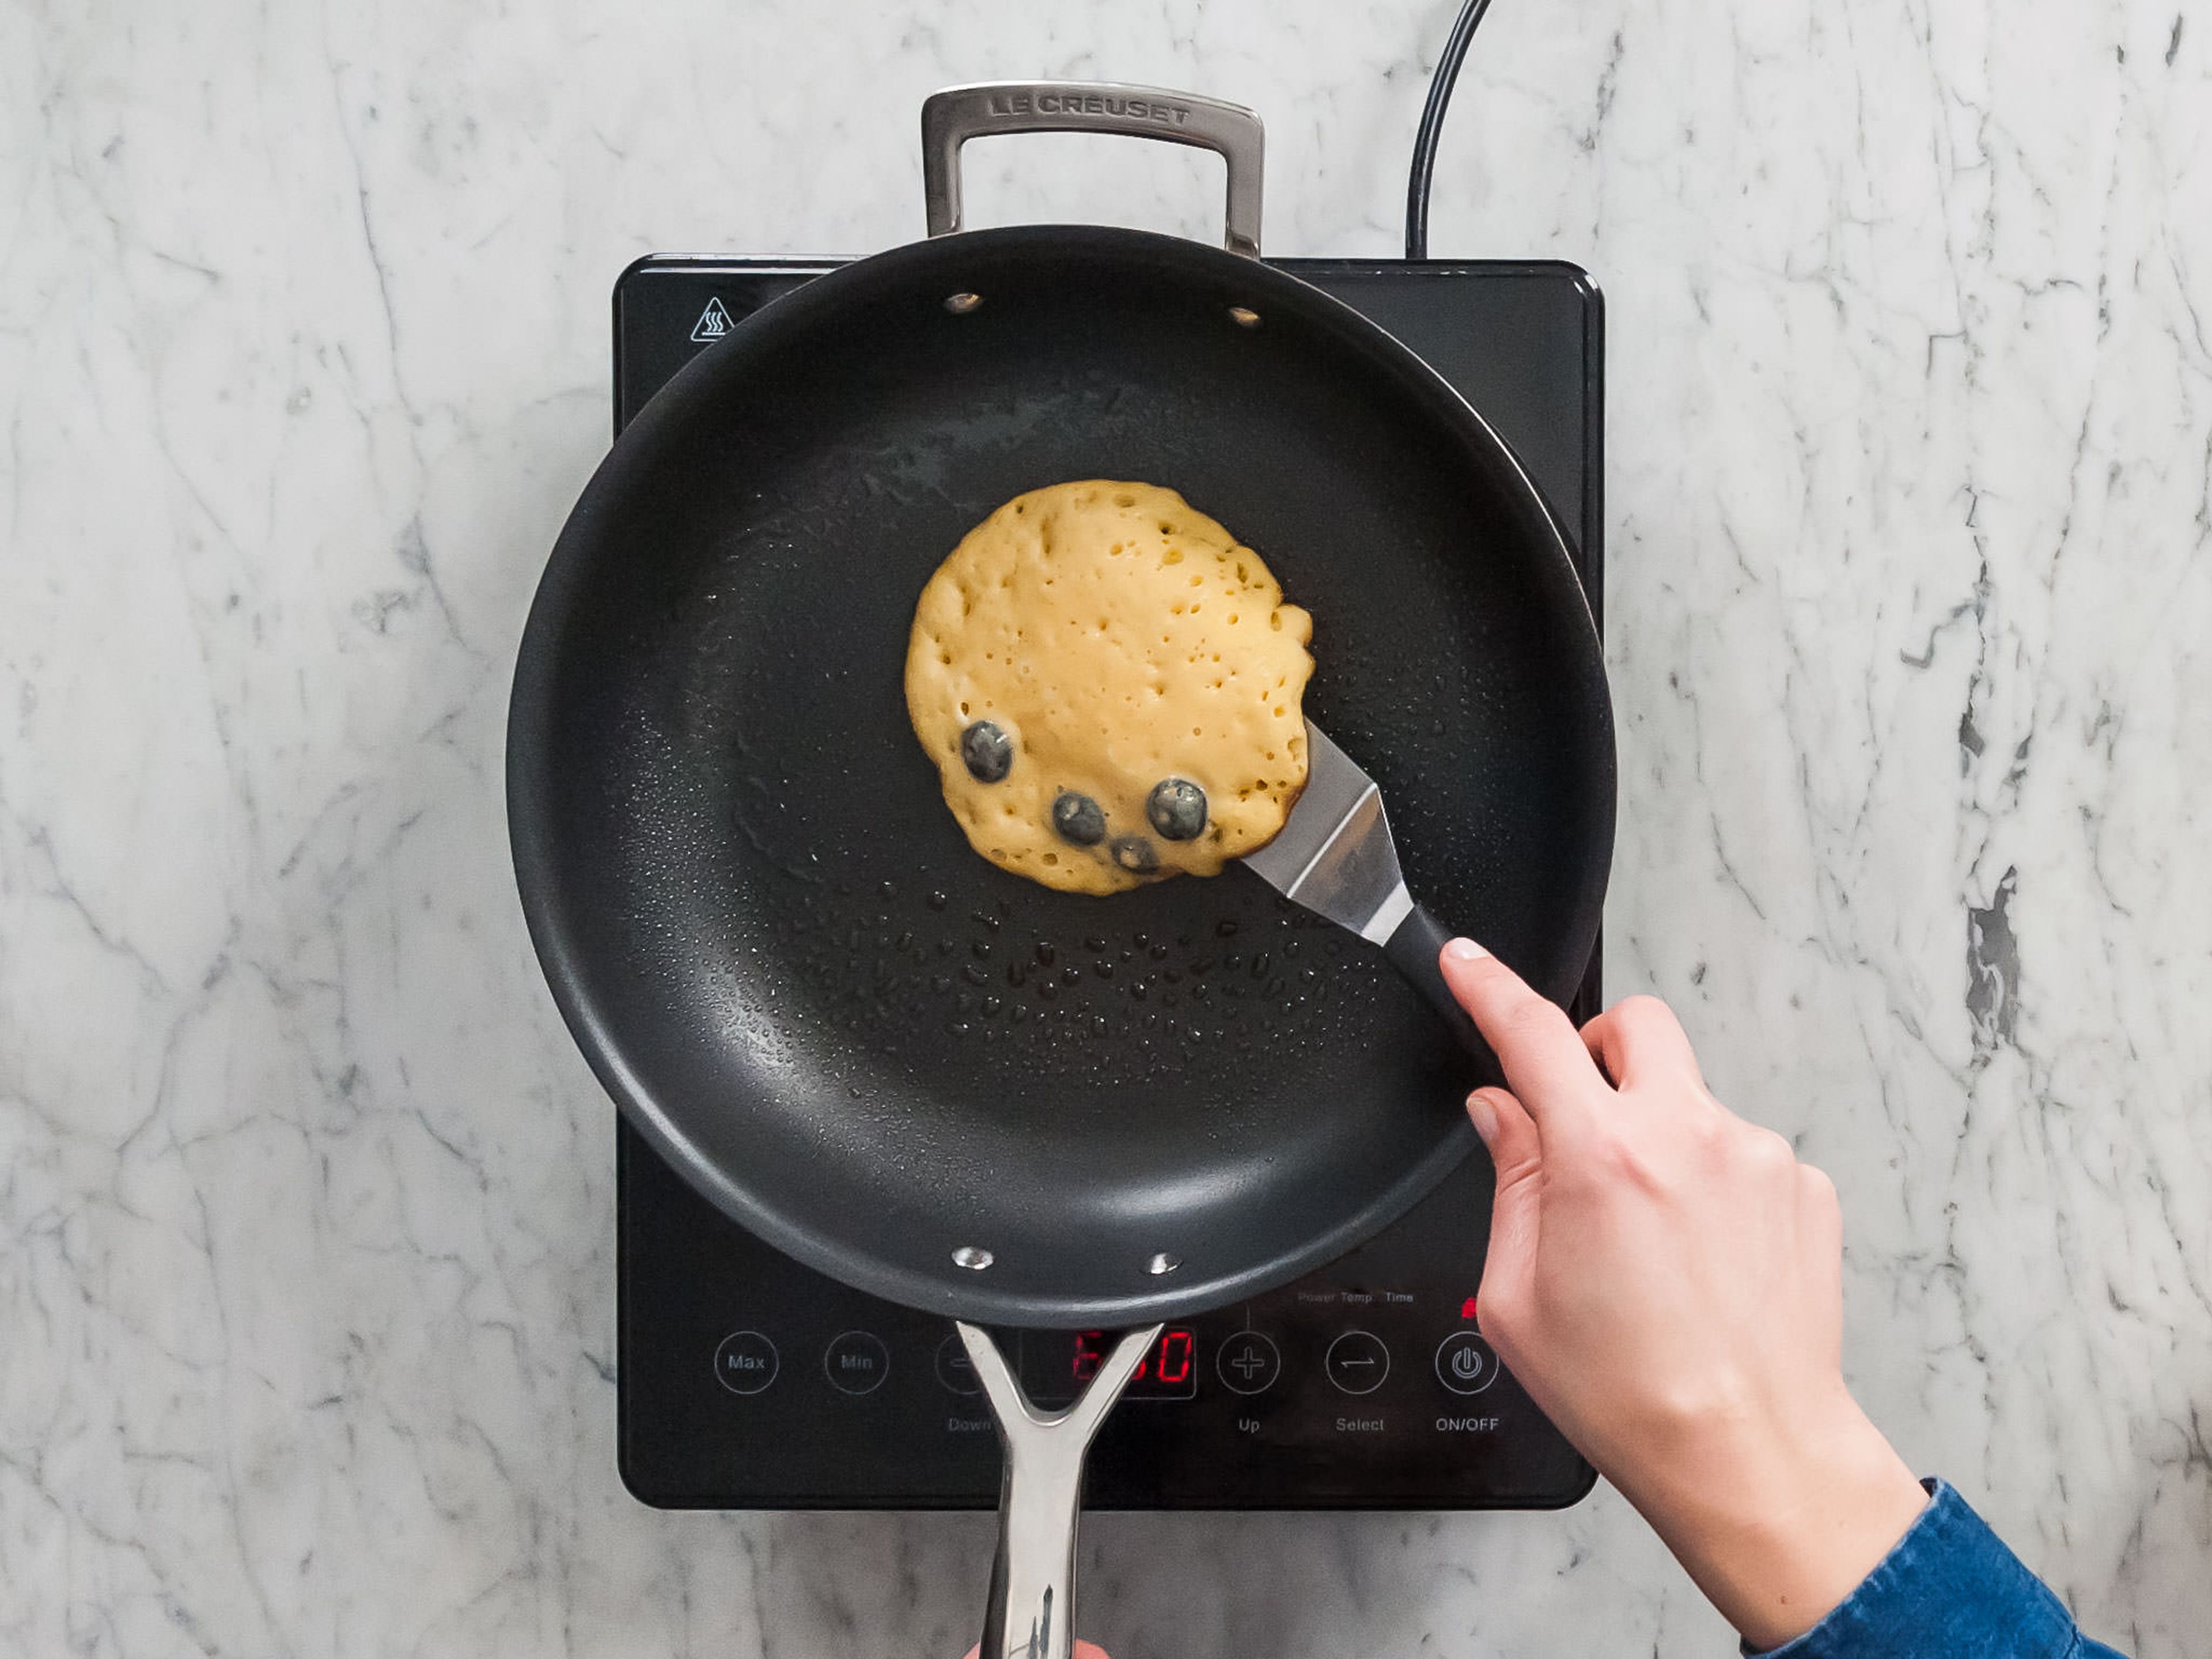 Spray large pan or griddle with nonstick cooking spray. Heat over medium heat. Spoon a small mount of batter onto hot pan. Cook until the batter bubbles begin to burst and edges are crisp up.